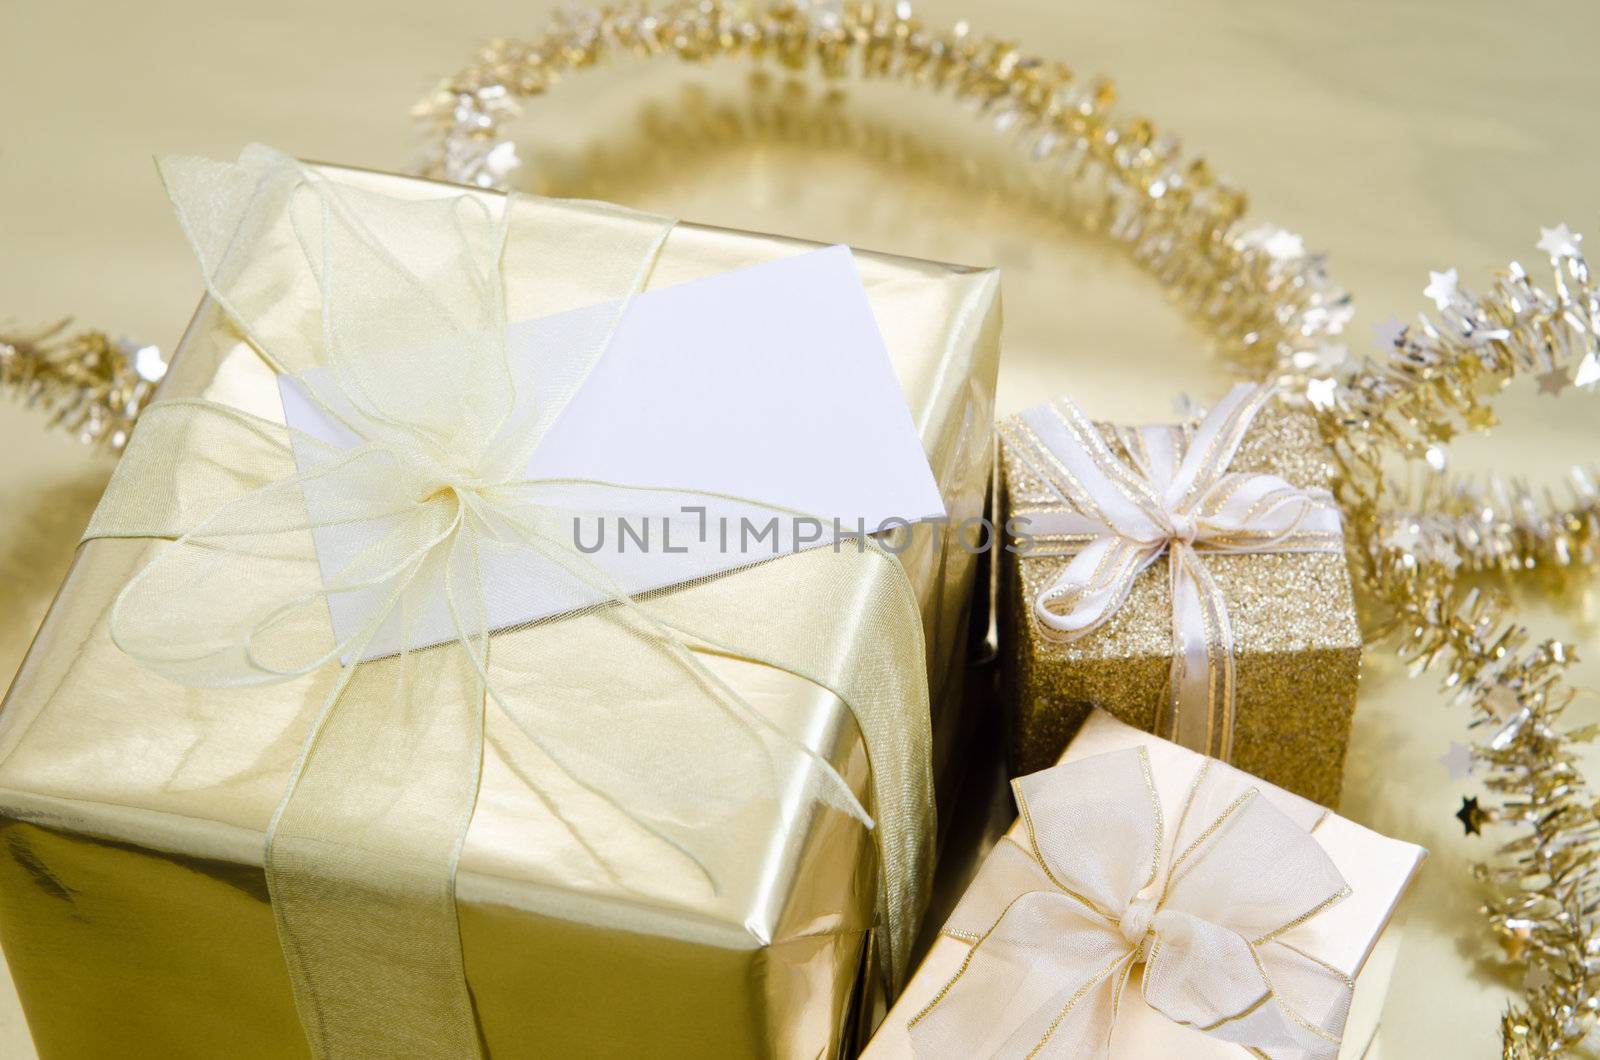 A group of Christmas gifts wrapped in gold foil paper with ribbon on a gold reflective surface with tinsel garland in background.